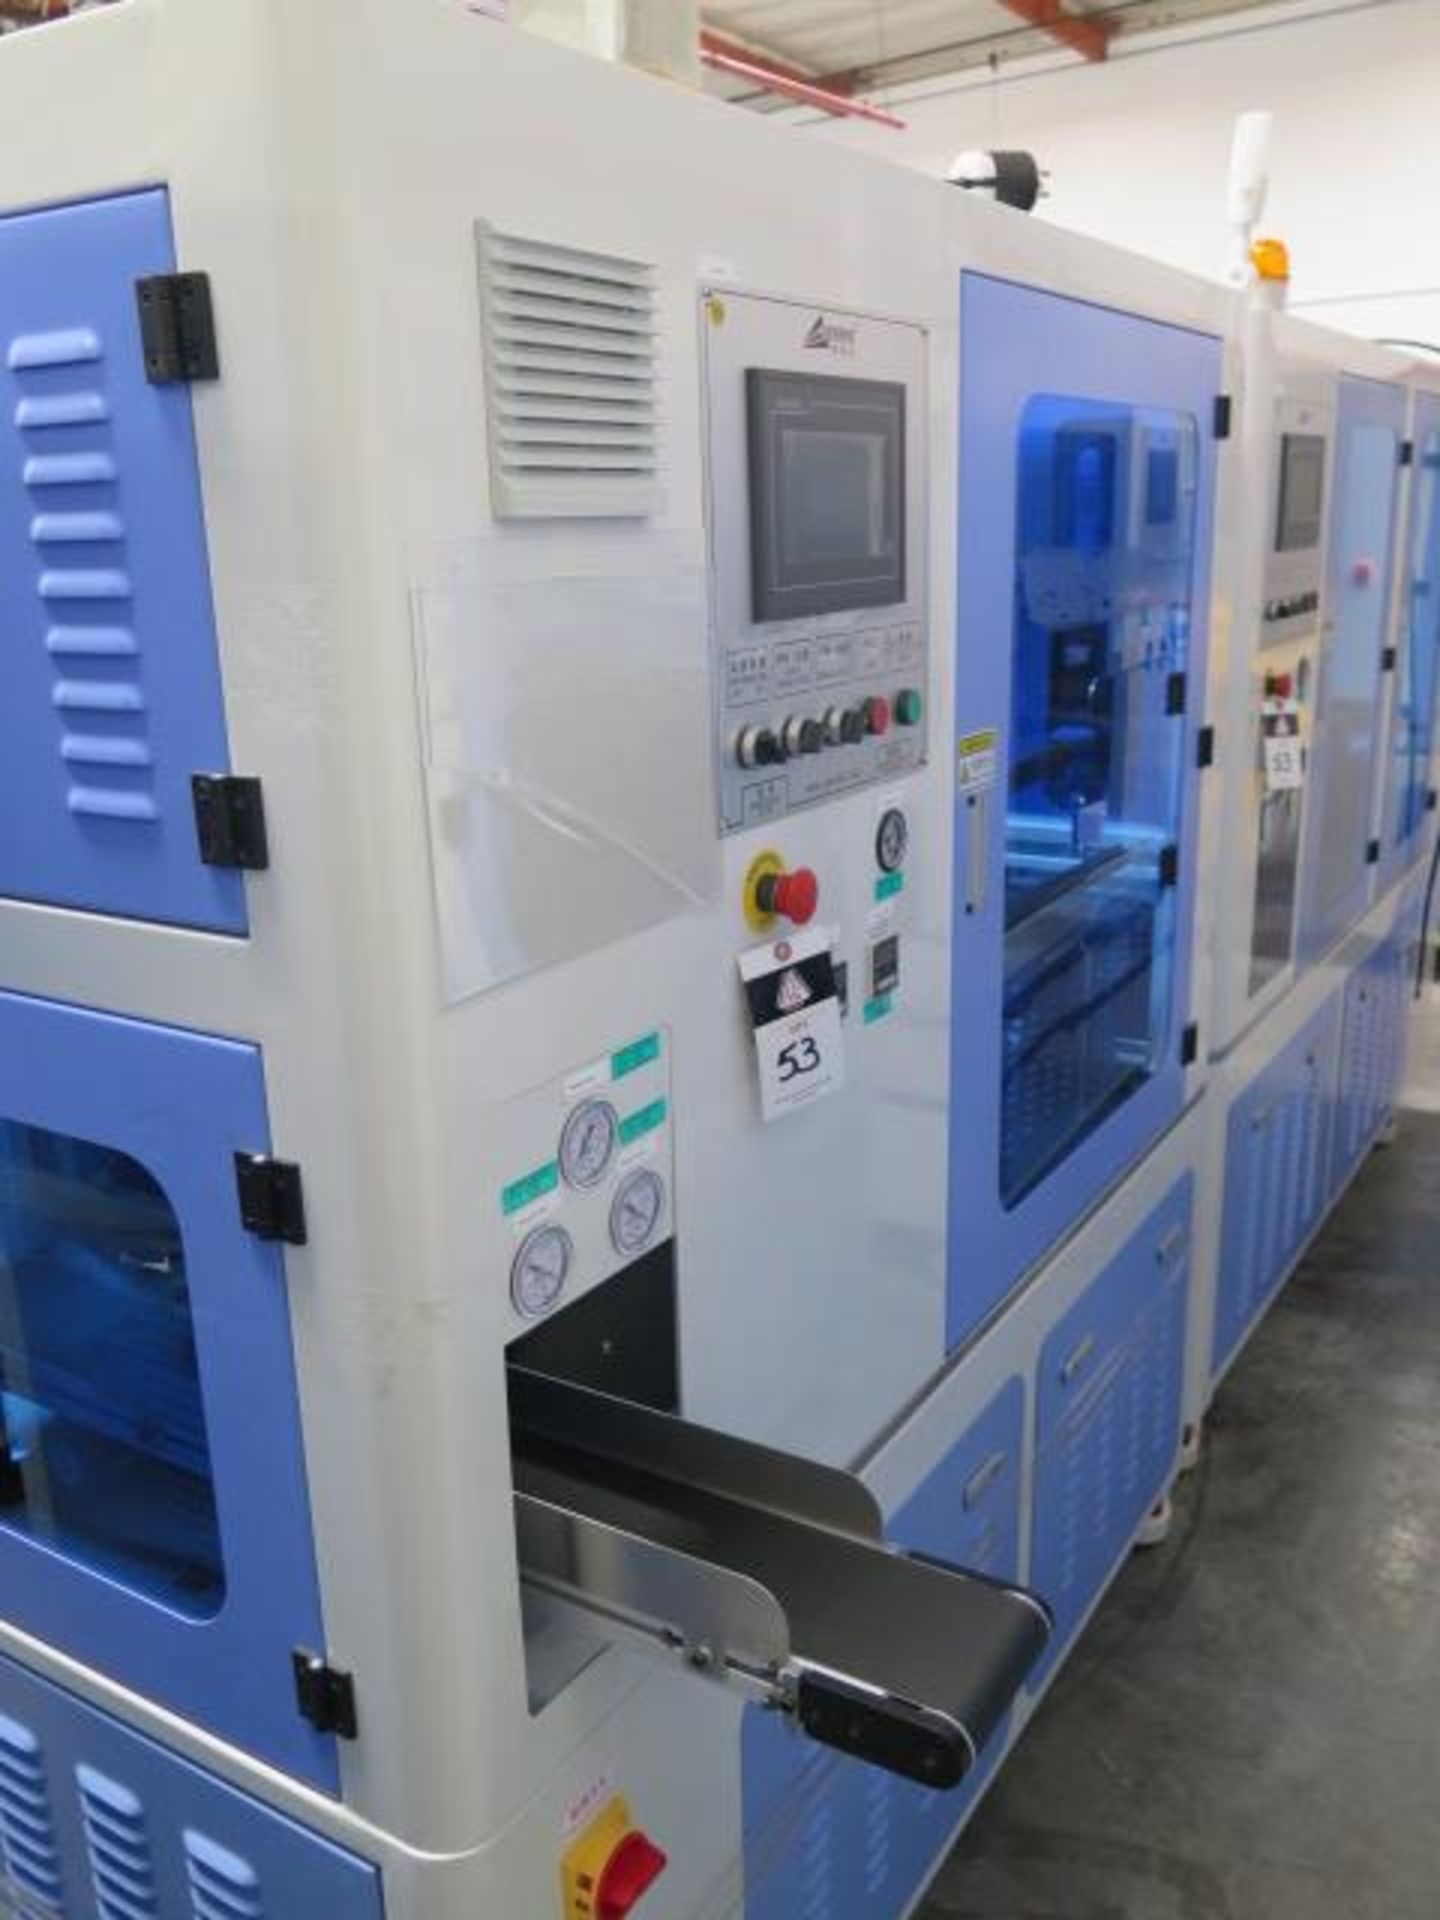 3/2021 Gereke mdl. GRK-TWO1 Cassette Assembly and Packaging Line s/n GRK20210305075, SOLD AS IS